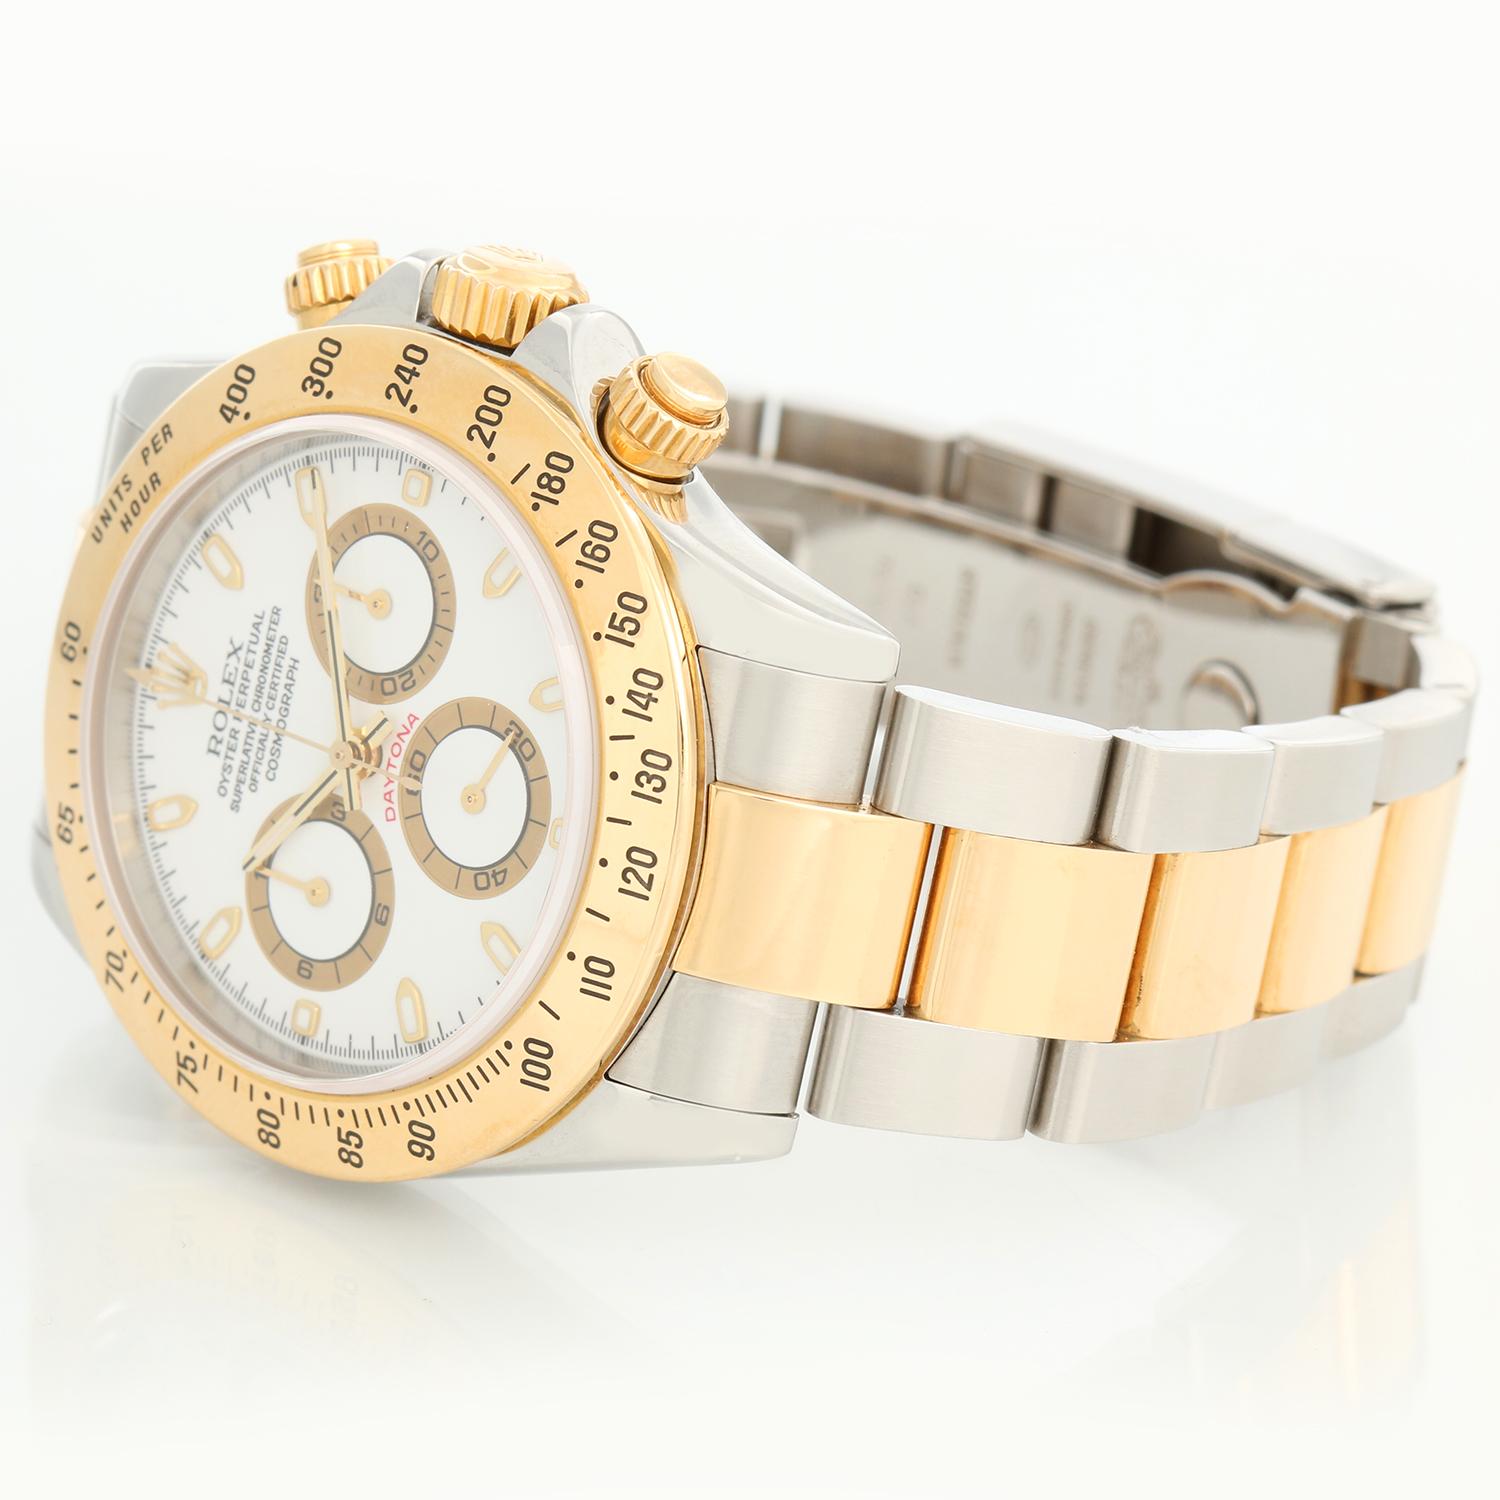 Rolex Cosmograph Daytona Men's Watch 116523 - Automatic winding, chronograph, 44 jewels, sapphire crystal. Stainless steel case with 18k yellow gold bezel. White dial with luminous-style markers. Stainless steel and 18k yellow gold Oyster bracelet